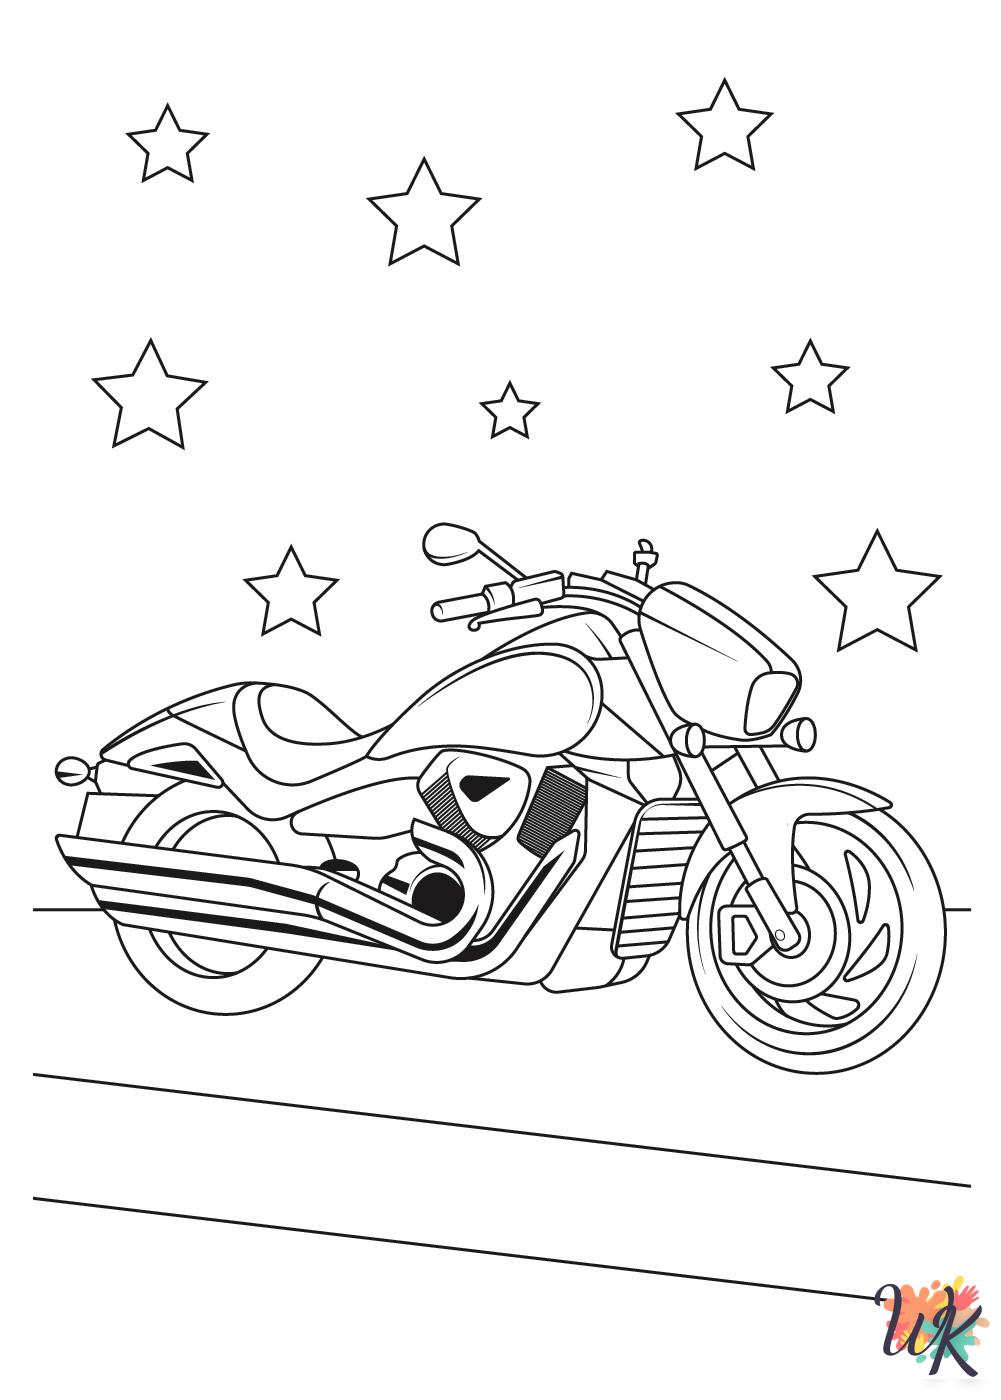 Motorcycle coloring pages for kids